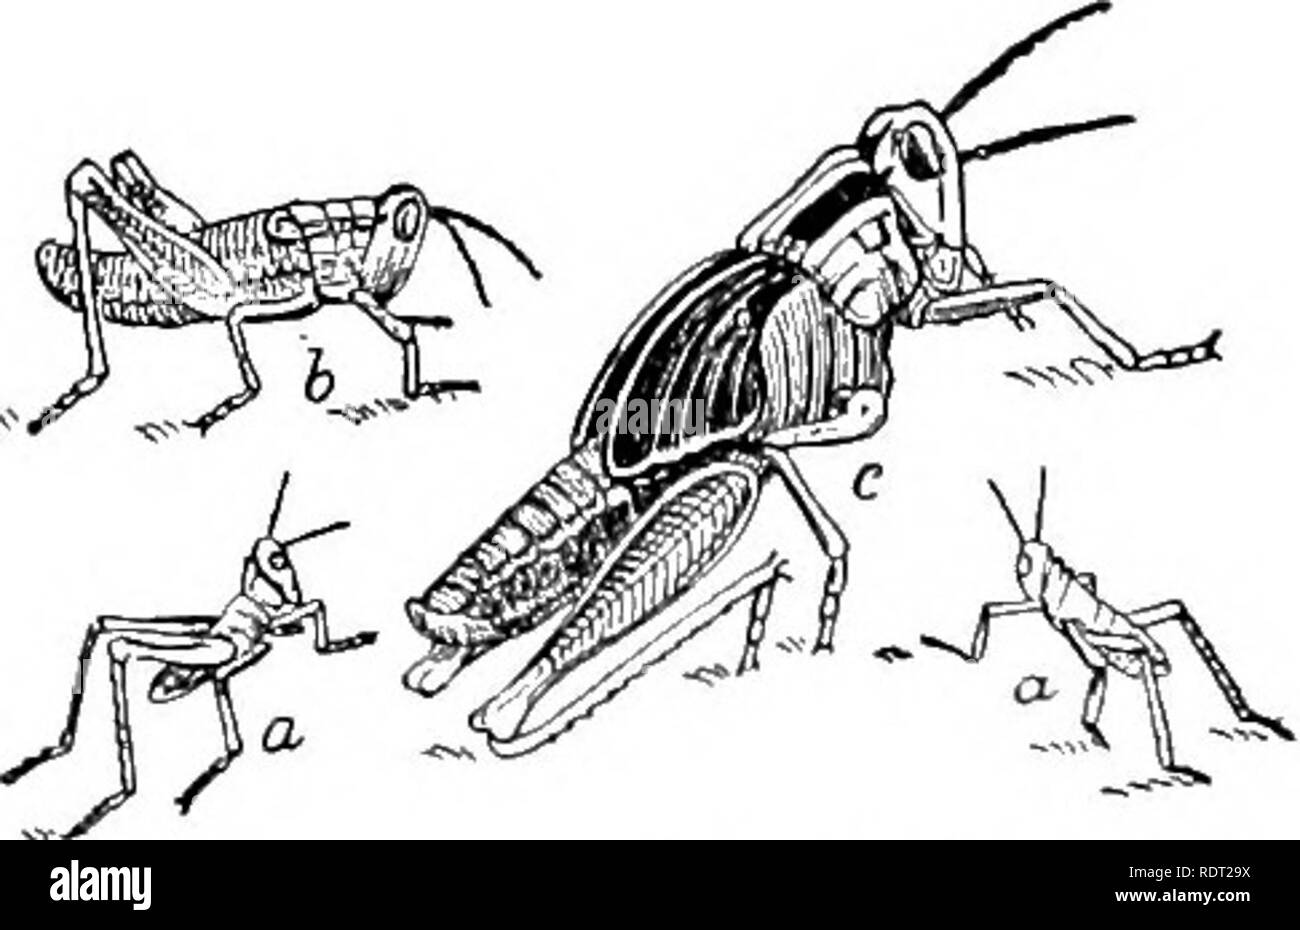 . Principles of economic zoo?logy. Zoology, Economic. Fig. 102.—Wing of cricket musician (enlarged), showing the file at a and the scraper at 6.. Fig. 103.—Calopt'enus spre'tus: a, n, Nowly hatched larvtv; 6, full-grown larva; c, pupa, natural size. (After Riley.) The cockroaches (Blat'tidm) are nocturnal insects, found about the pantries and water-pipes of our dwellings, though in the North, according to Comstock, our native species lives in woods and fields. One may often find them hiding under bark, sticks, and stones. The jaws are strong and toothed, and they are greedy little creatiu-cs,  Stock Photo